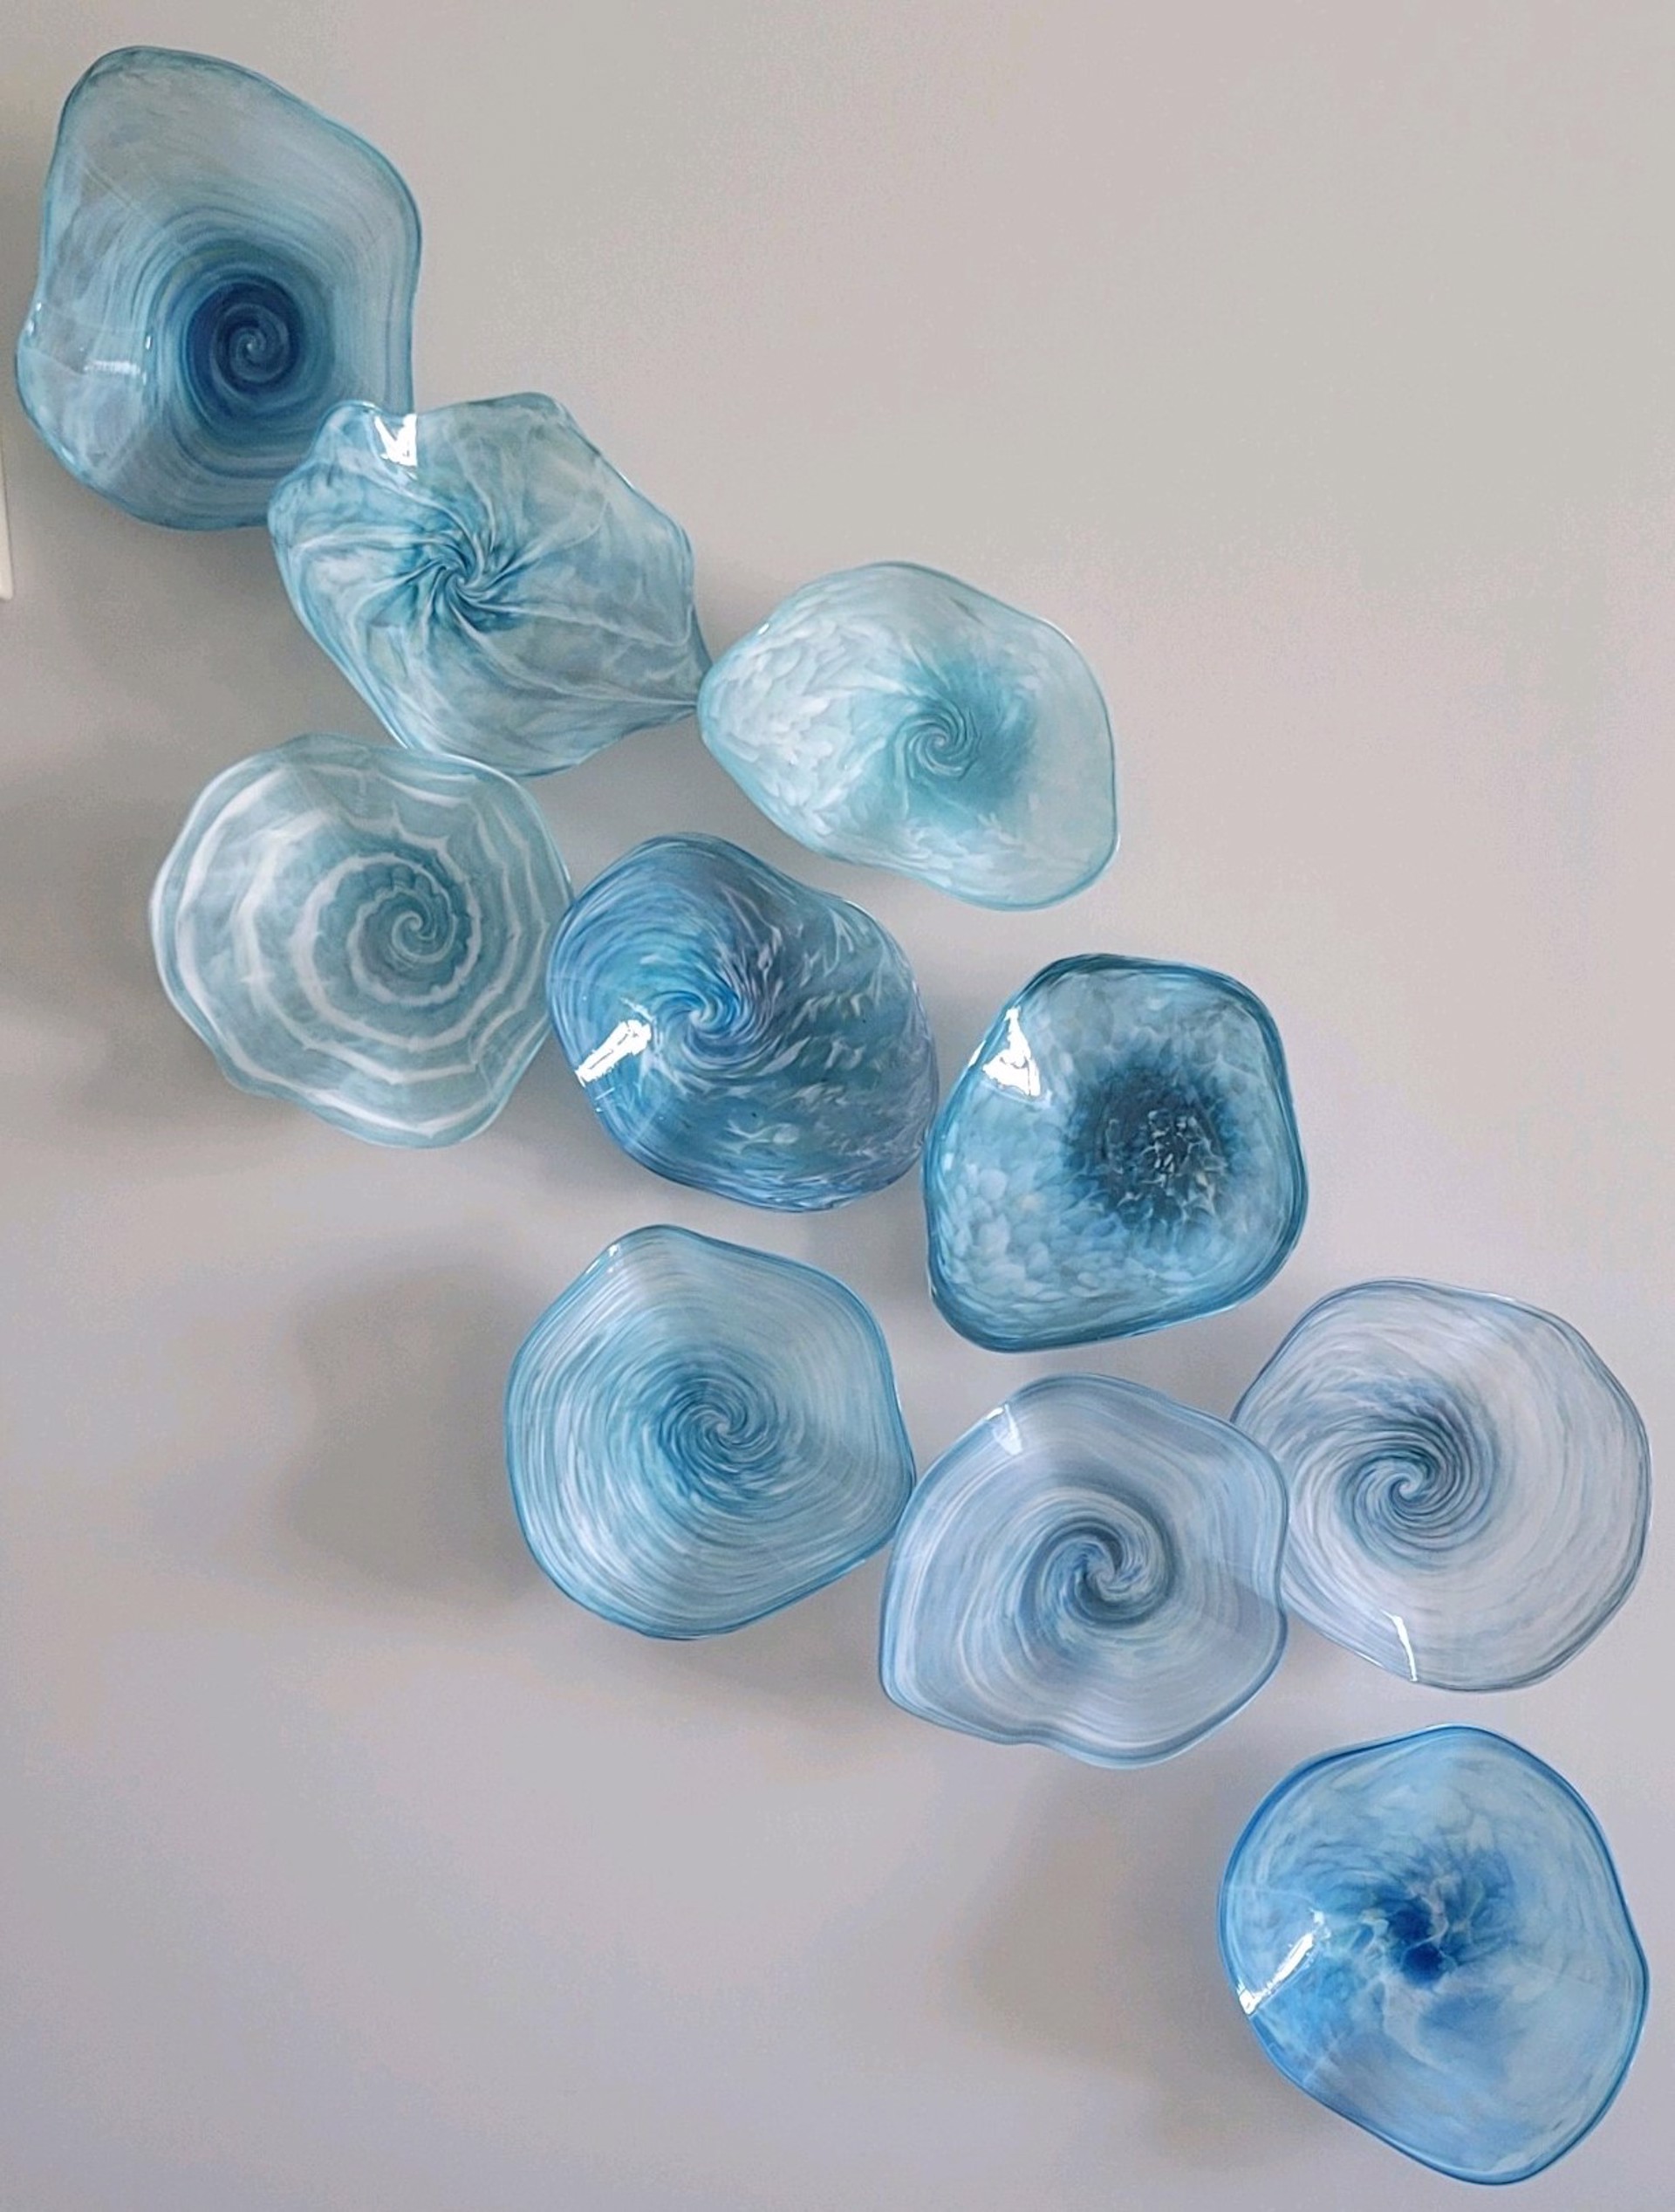 10 Small Pieces of Wall Glass by T. Miller